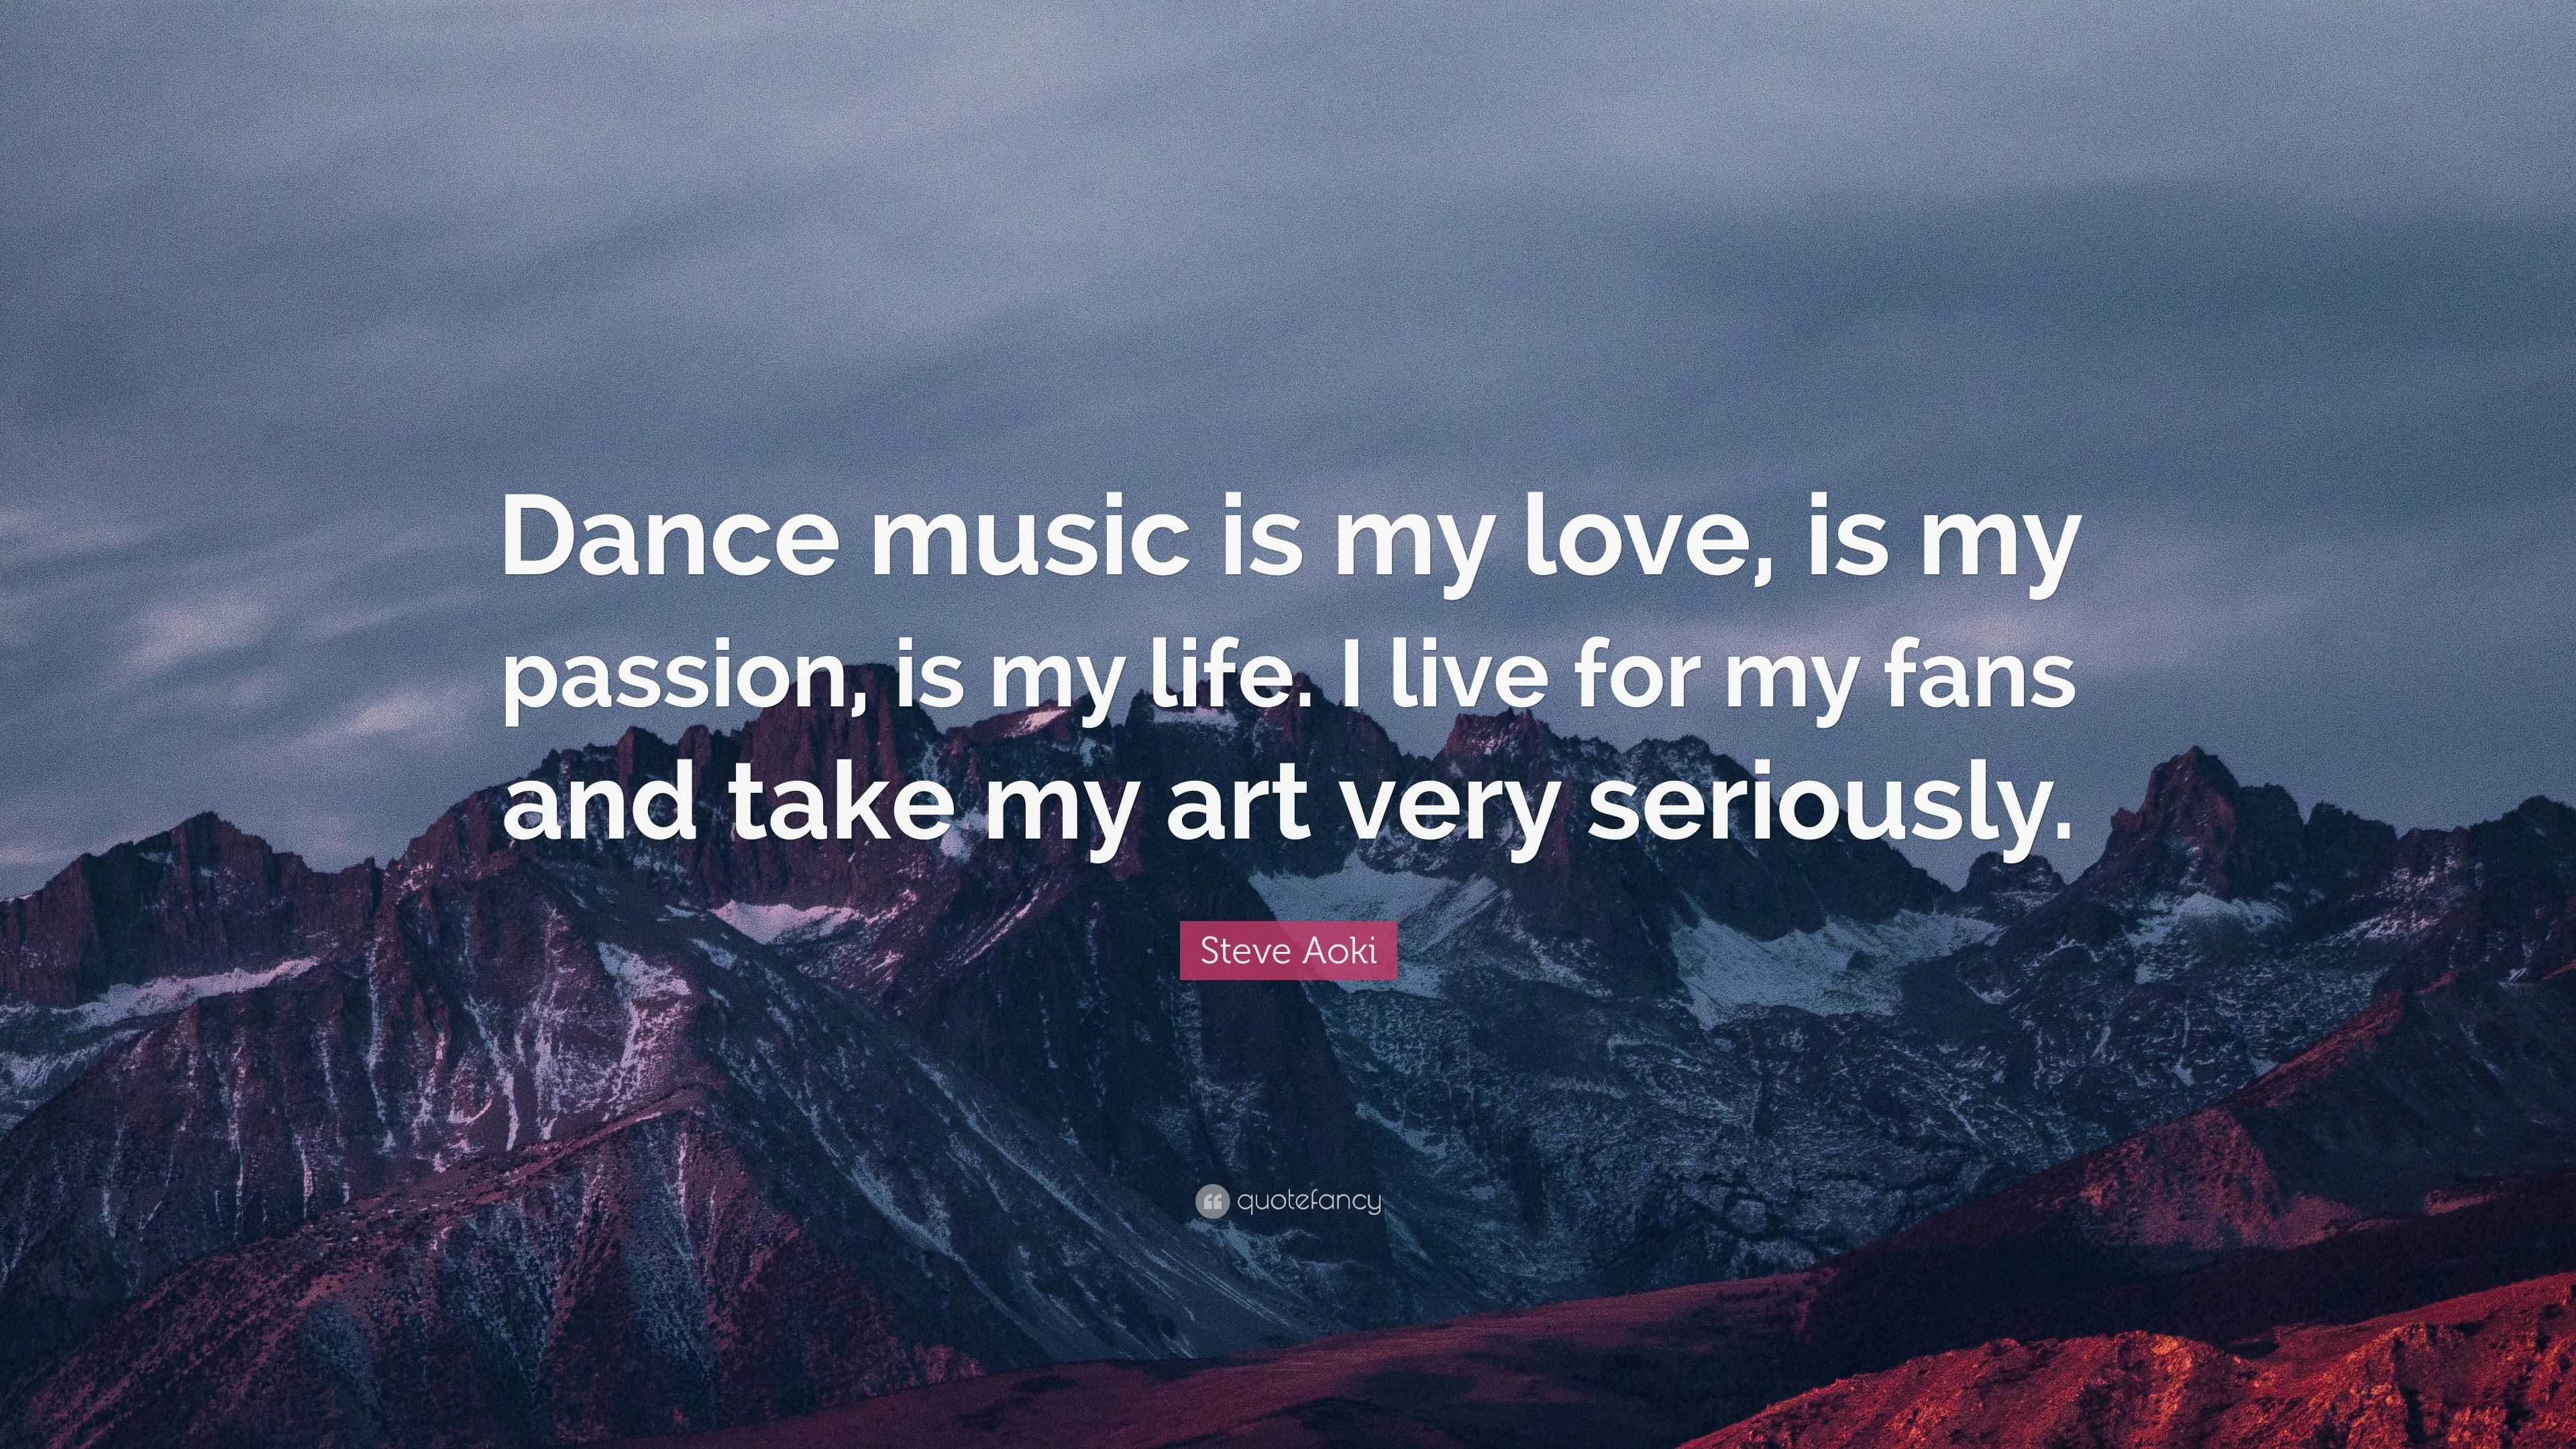 Steve Aoki Quote “Dance music is my love is my passion is